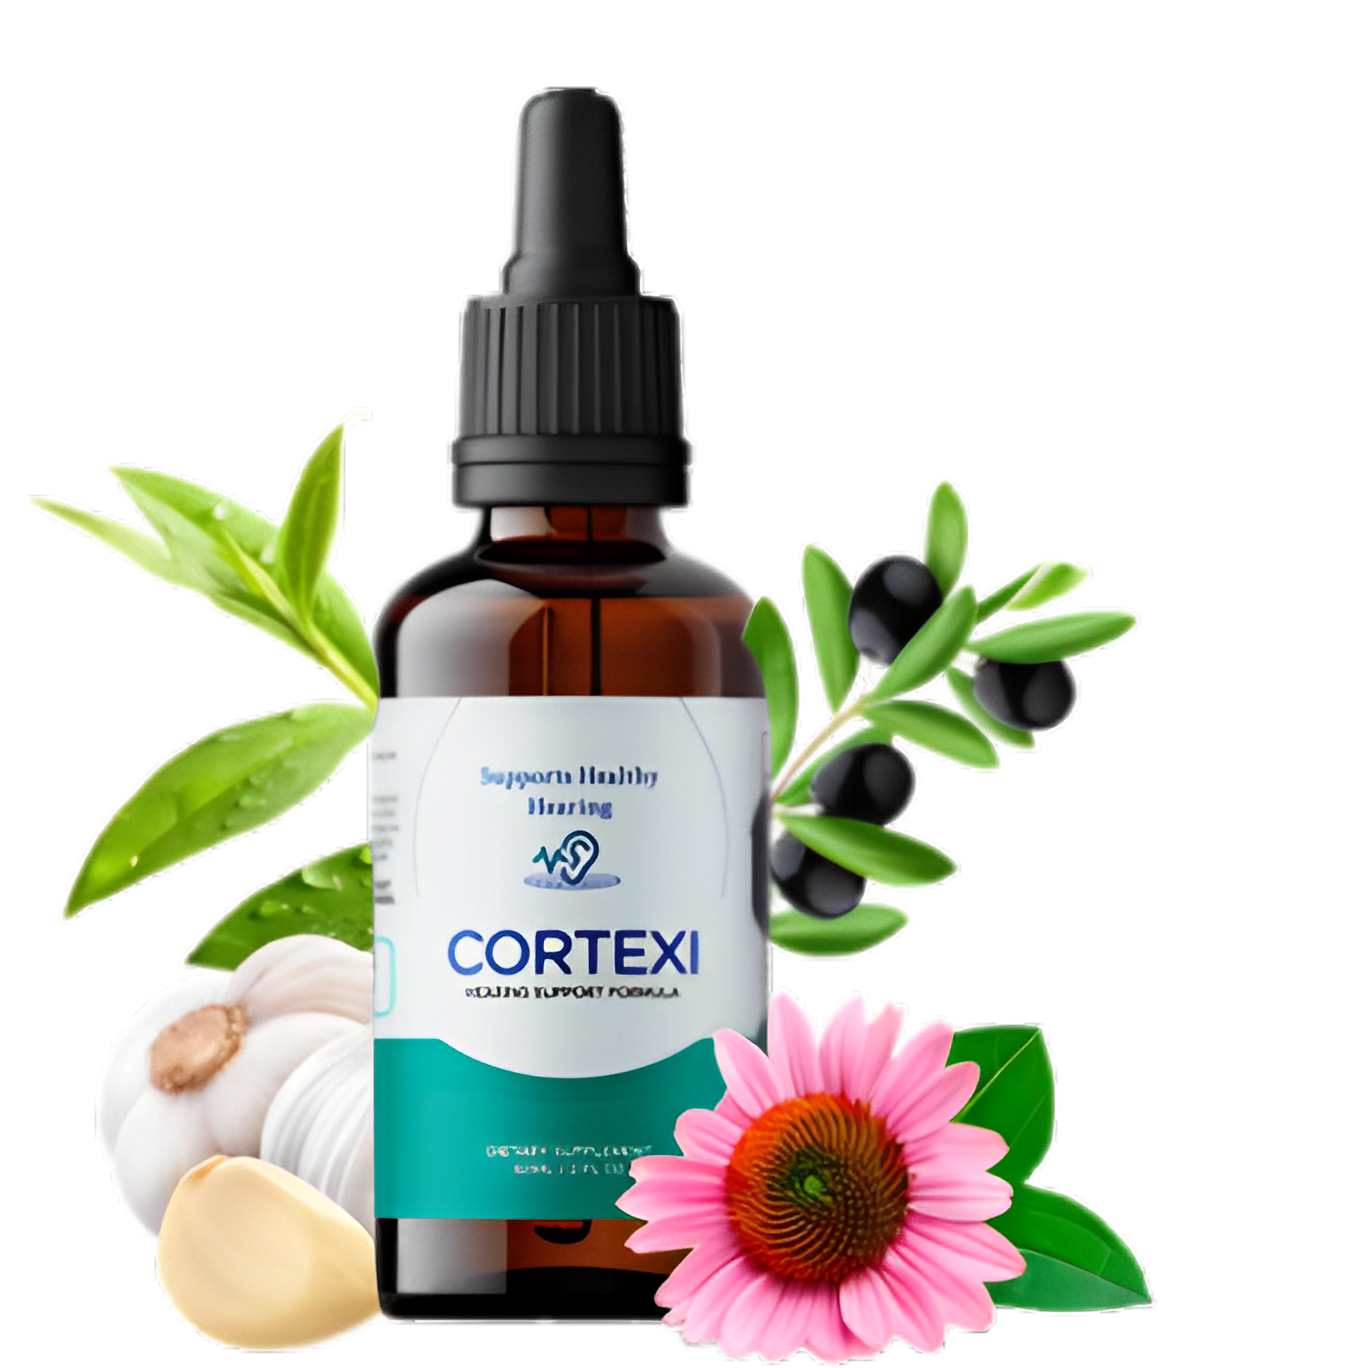 Say goodbye to earaches with Cortexi's natural formula